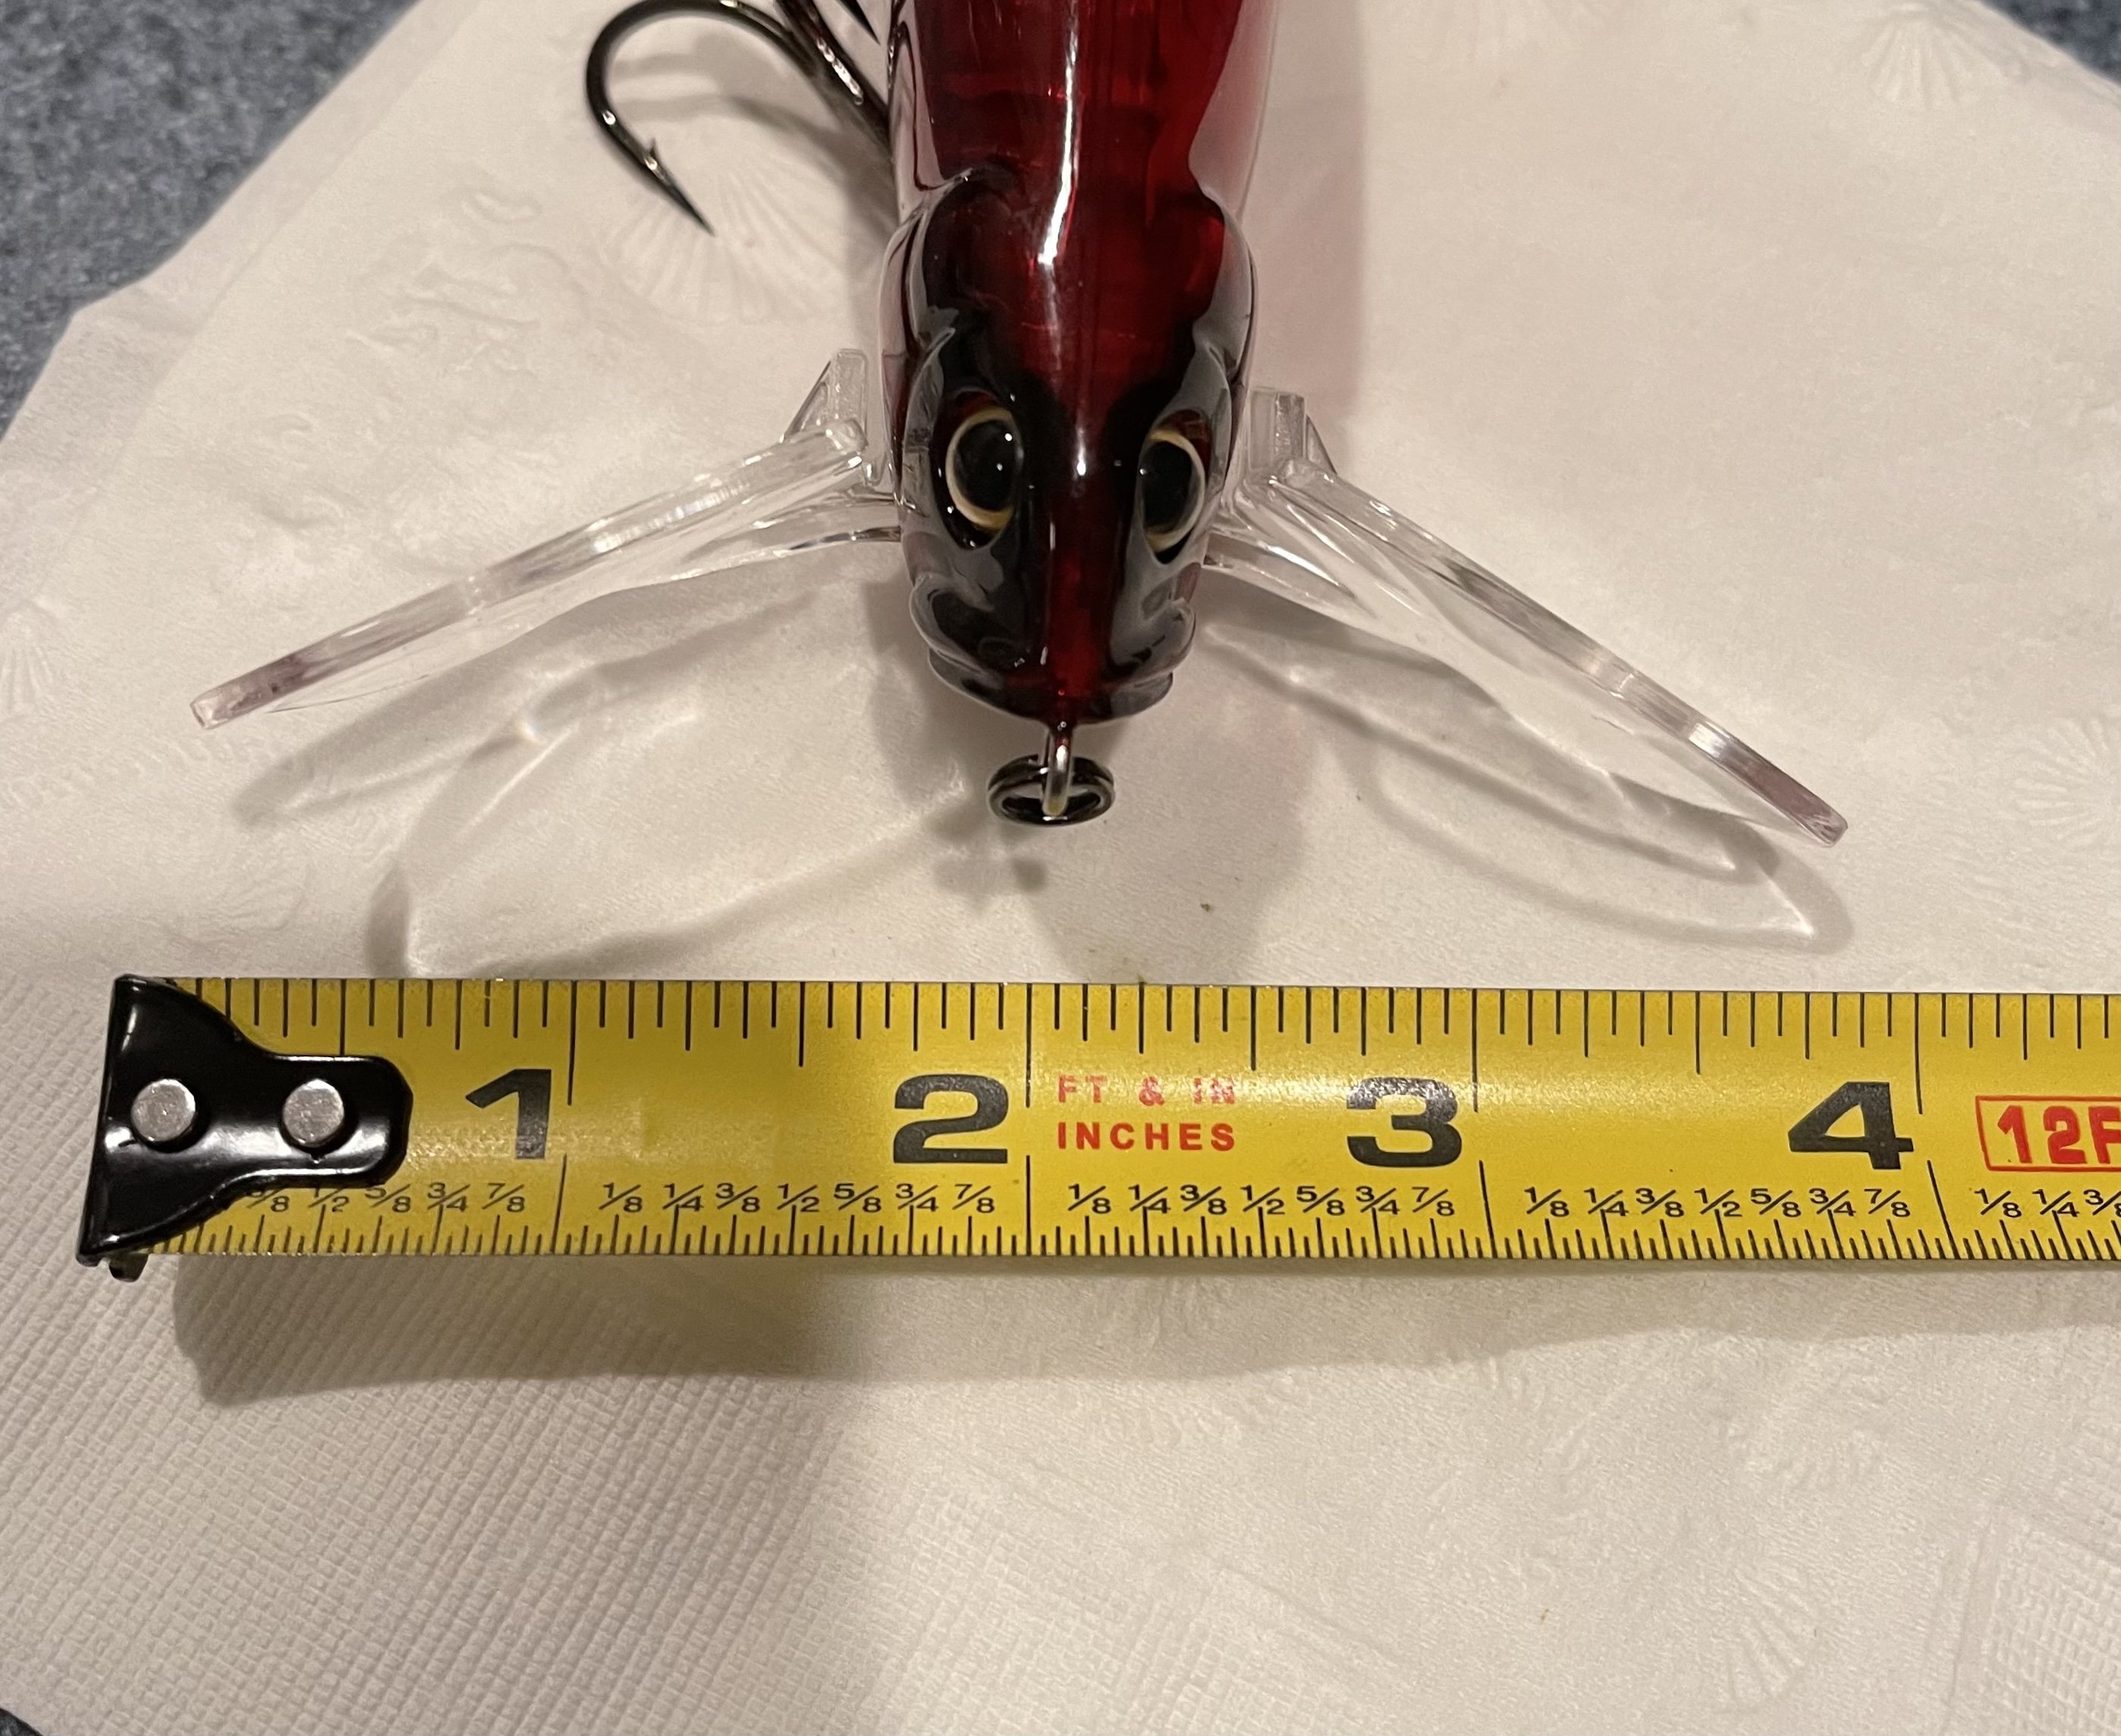 Preordering from tackle warehouse - Fishing Tackle - Bass Fishing Forums